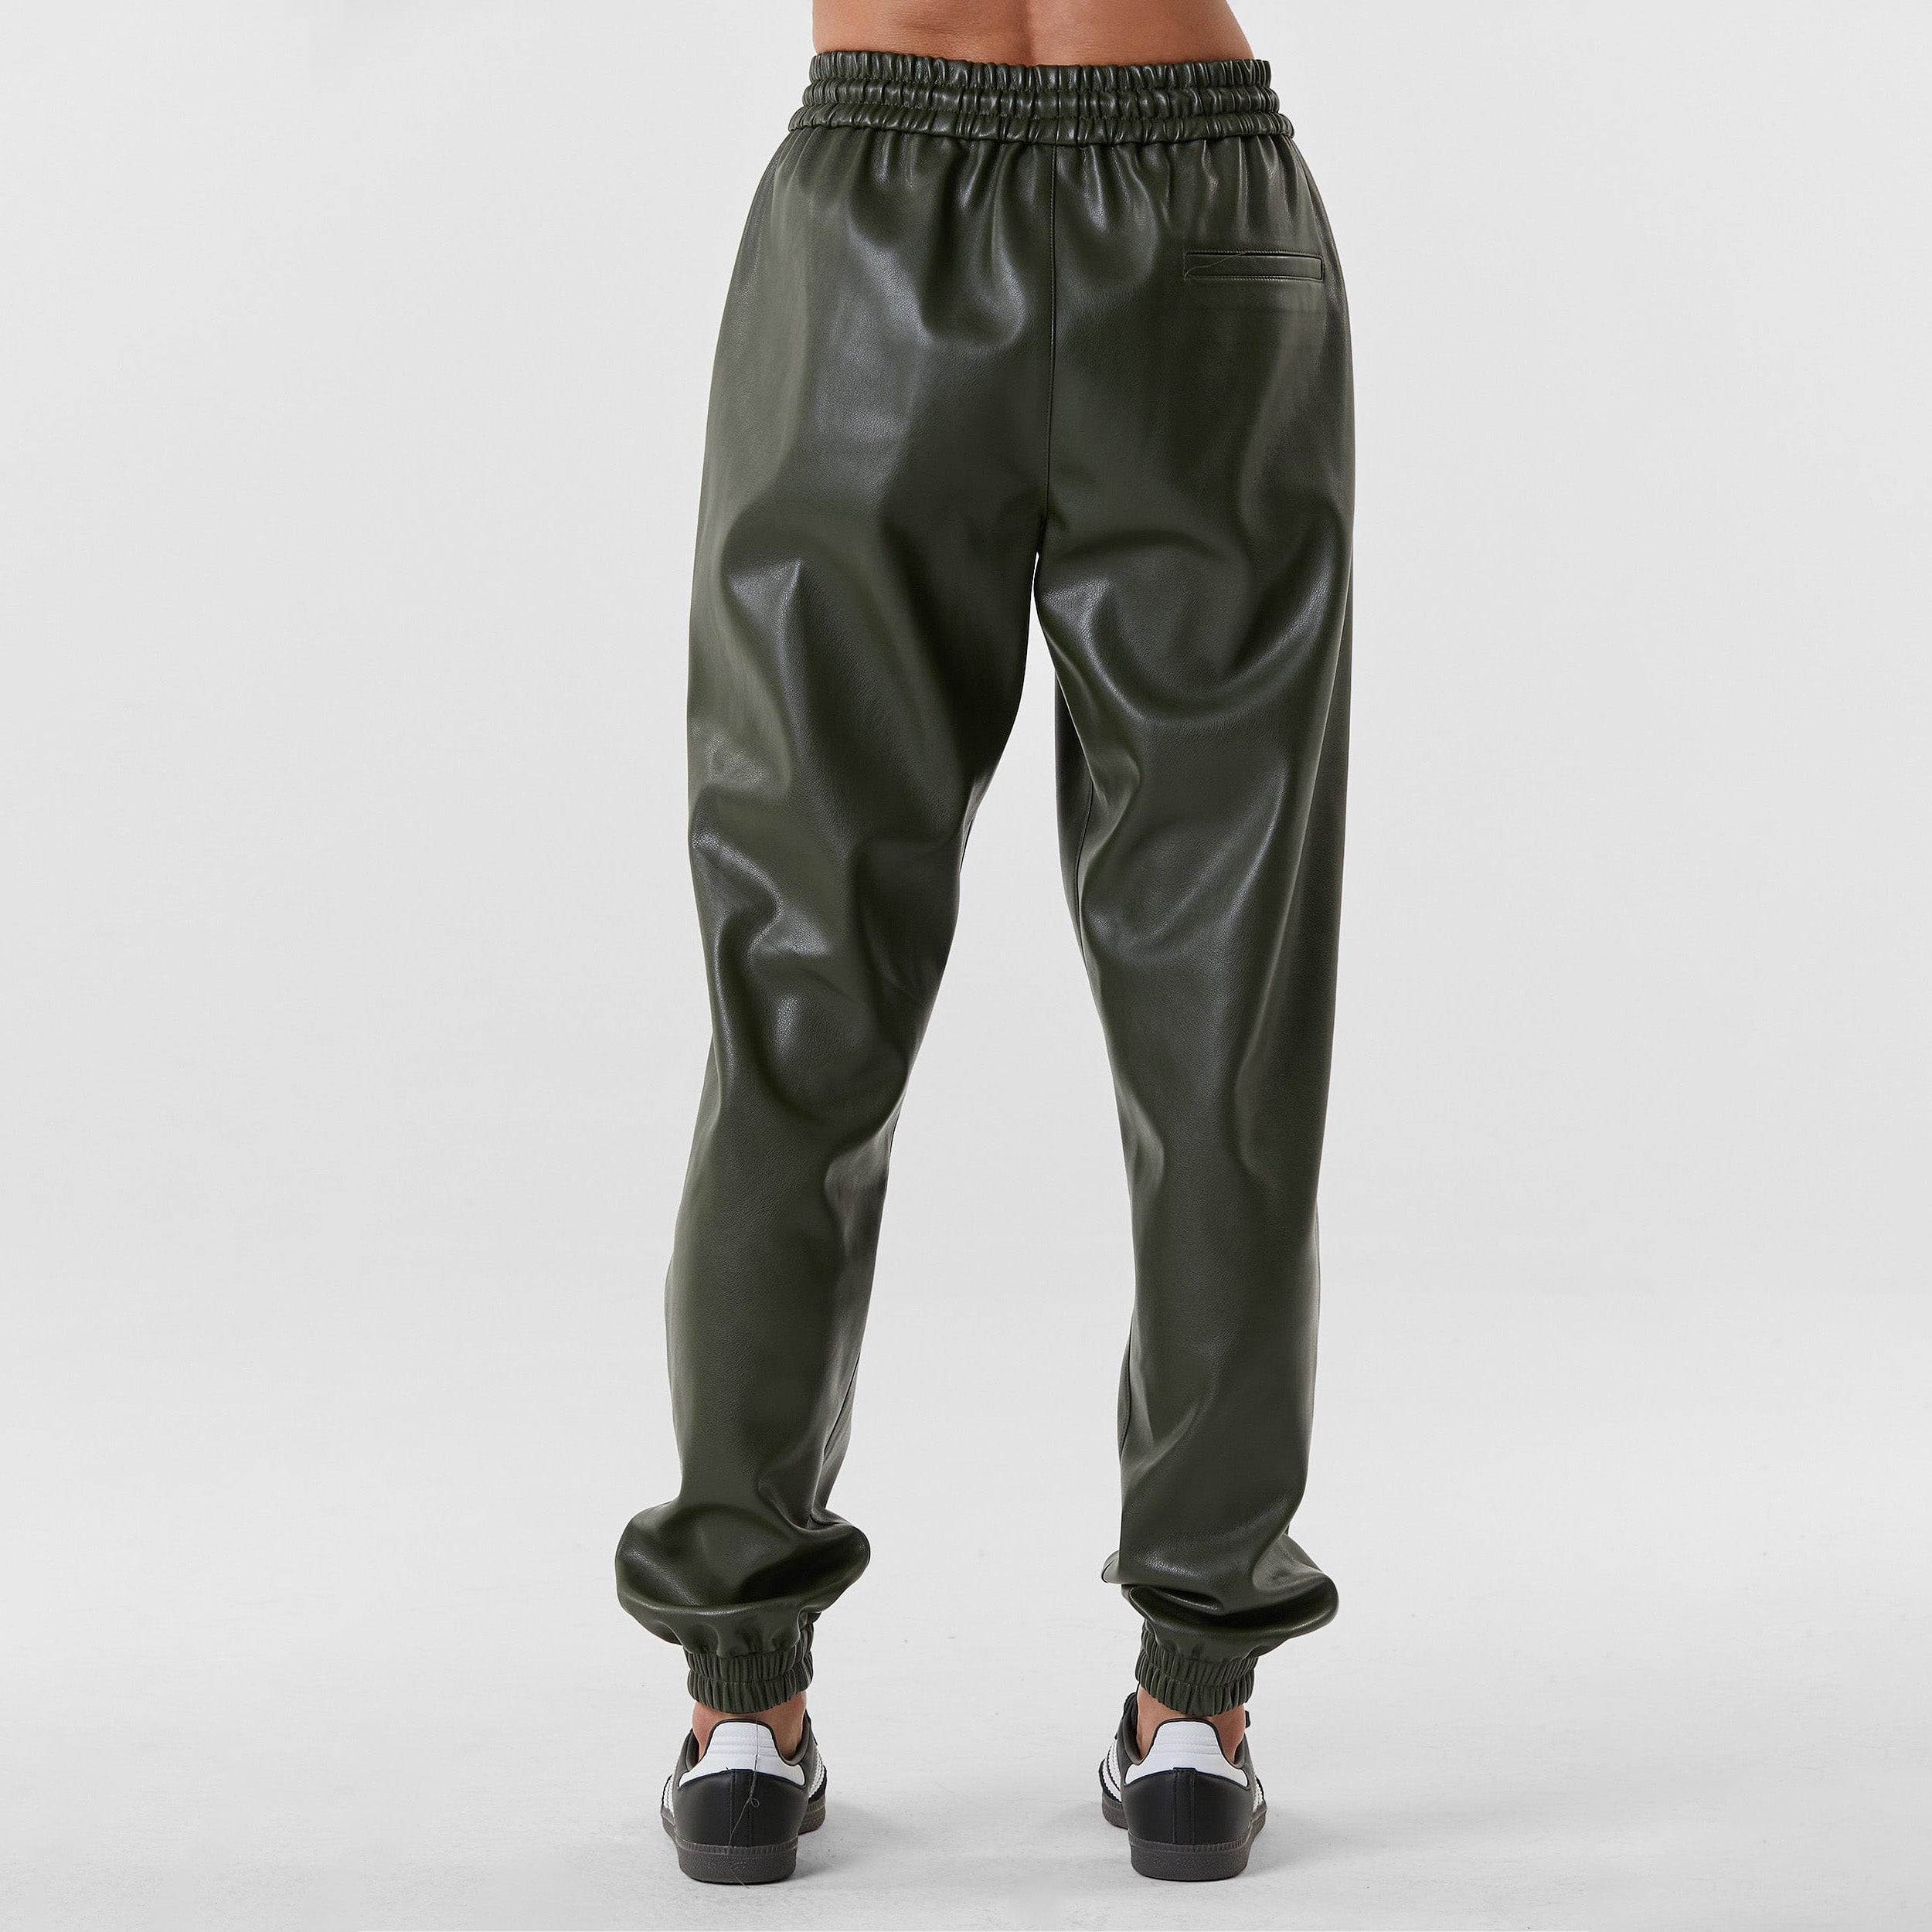 Rear view of woman wearing hunter green high rise faux leather jogger with drawstring waistband and cinched ankles with suede lining.